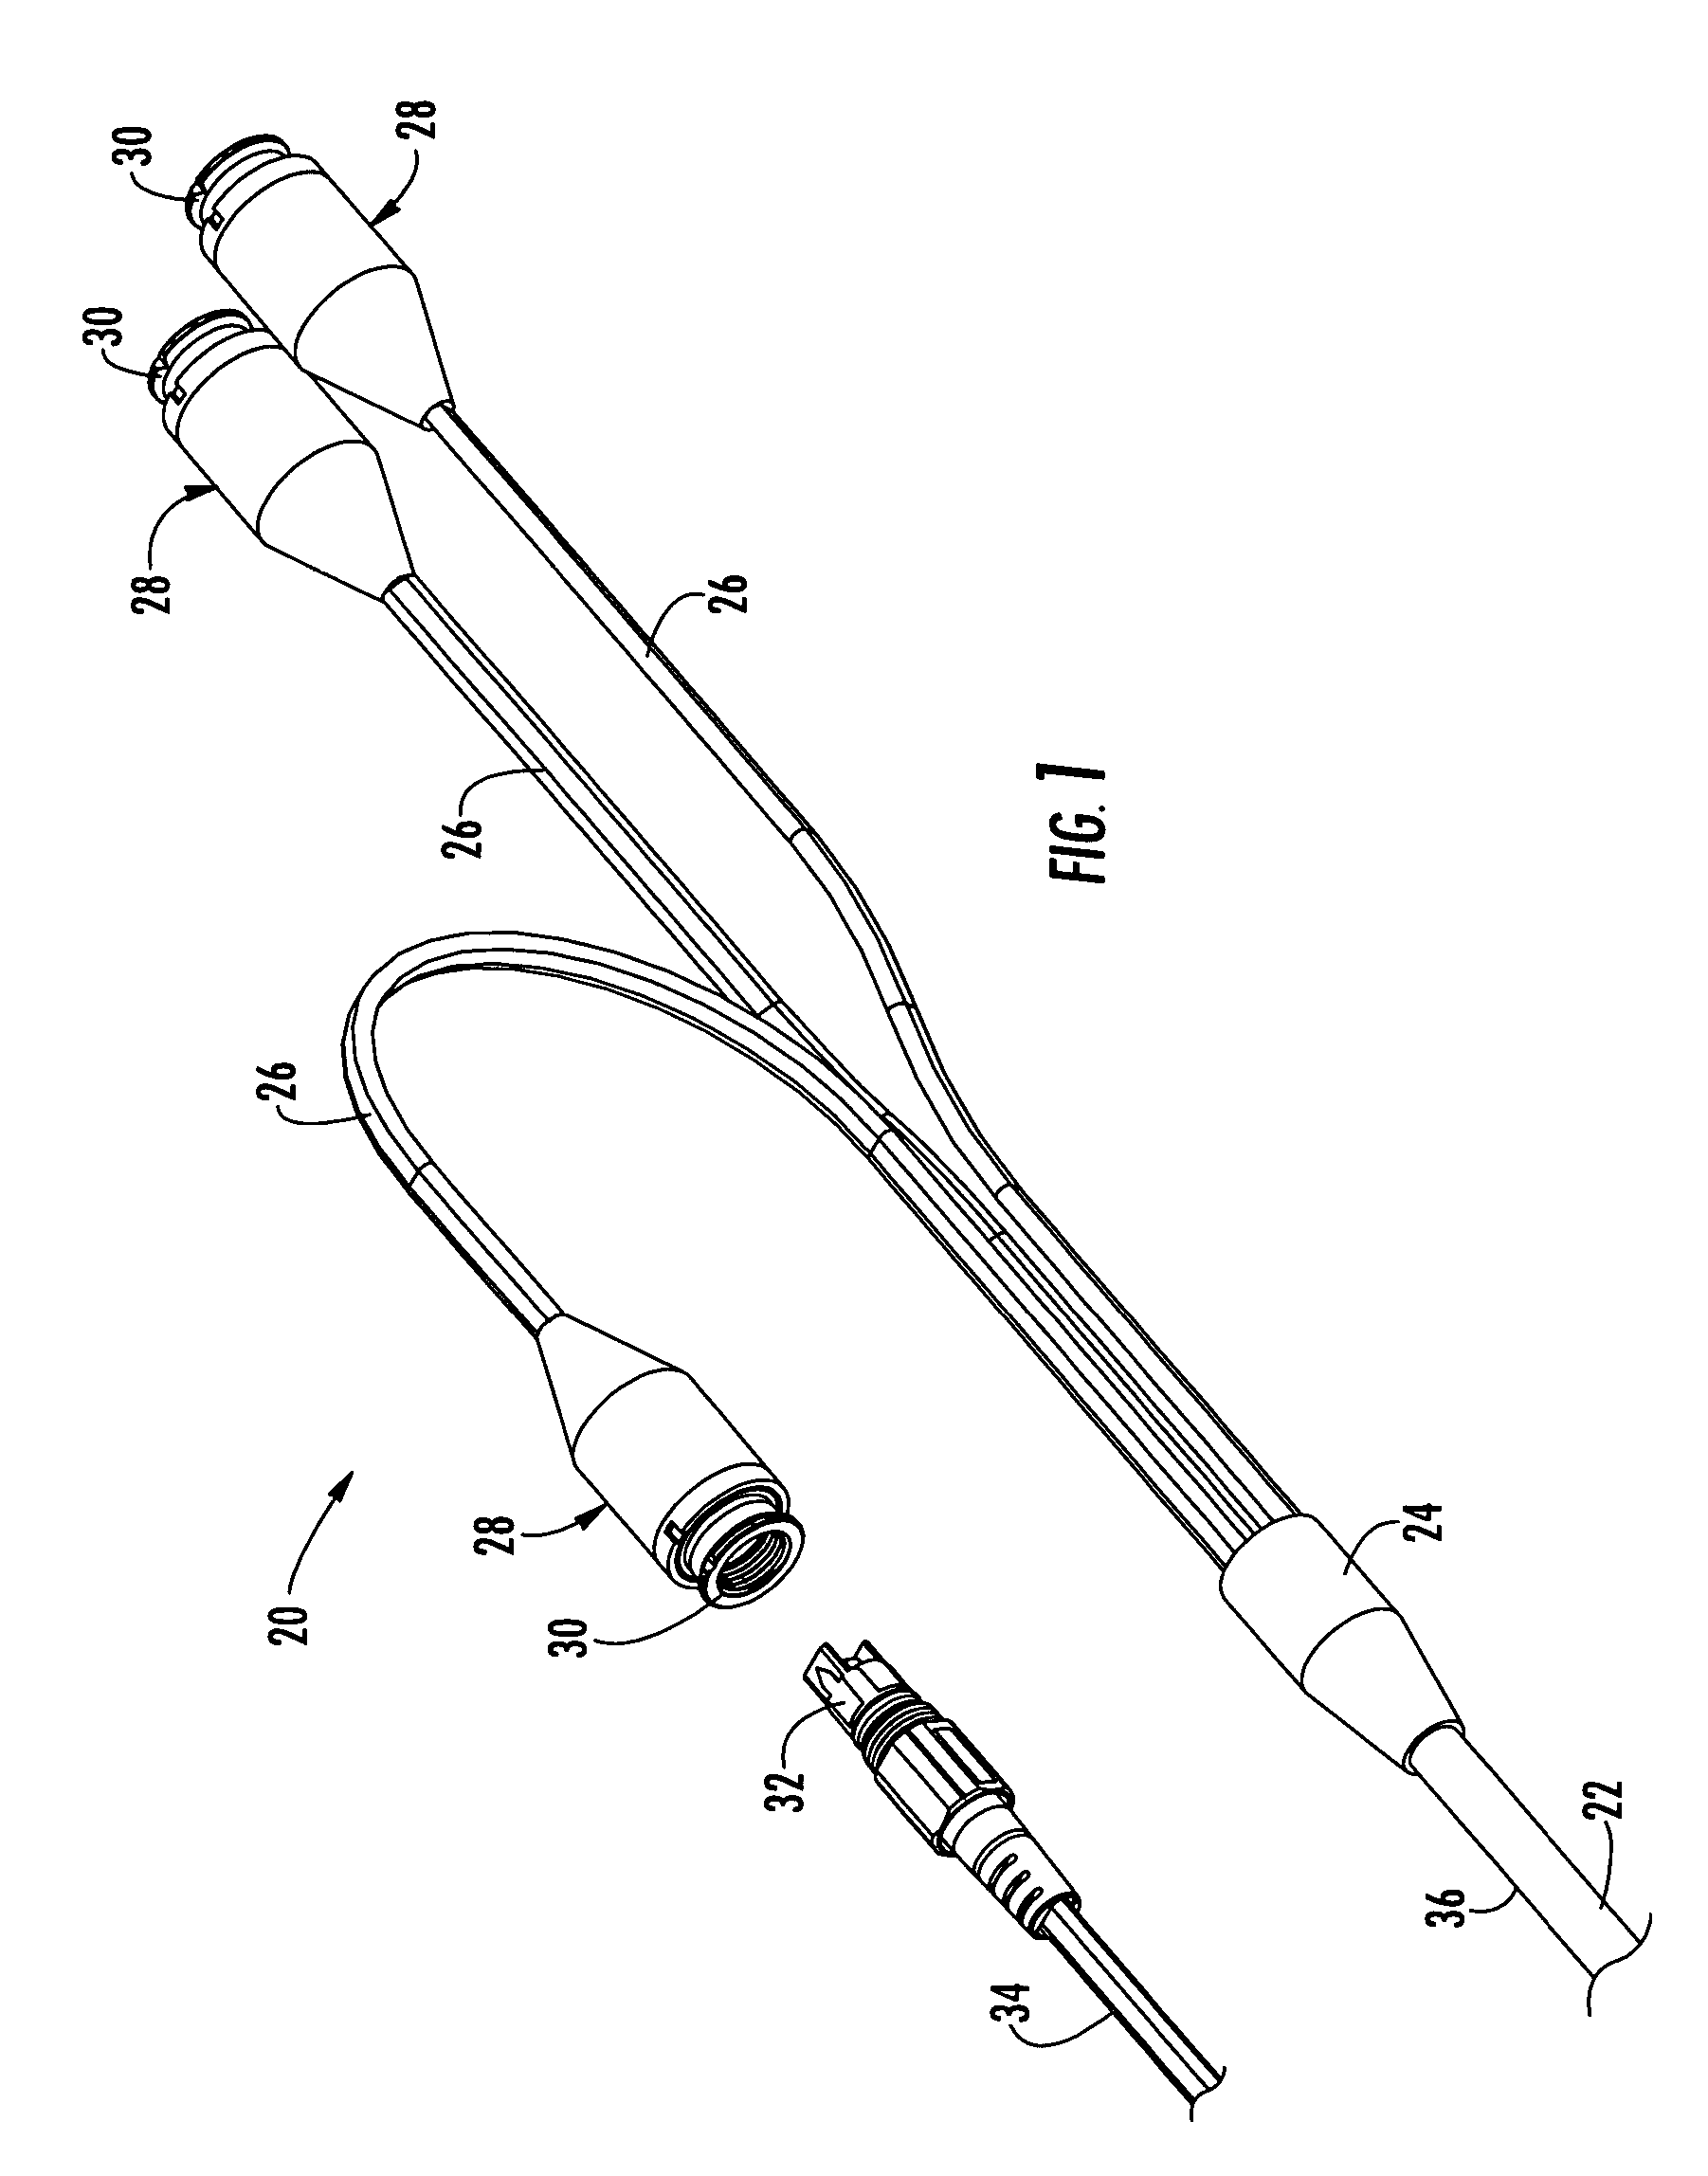 Tether assembly having individual connector ports